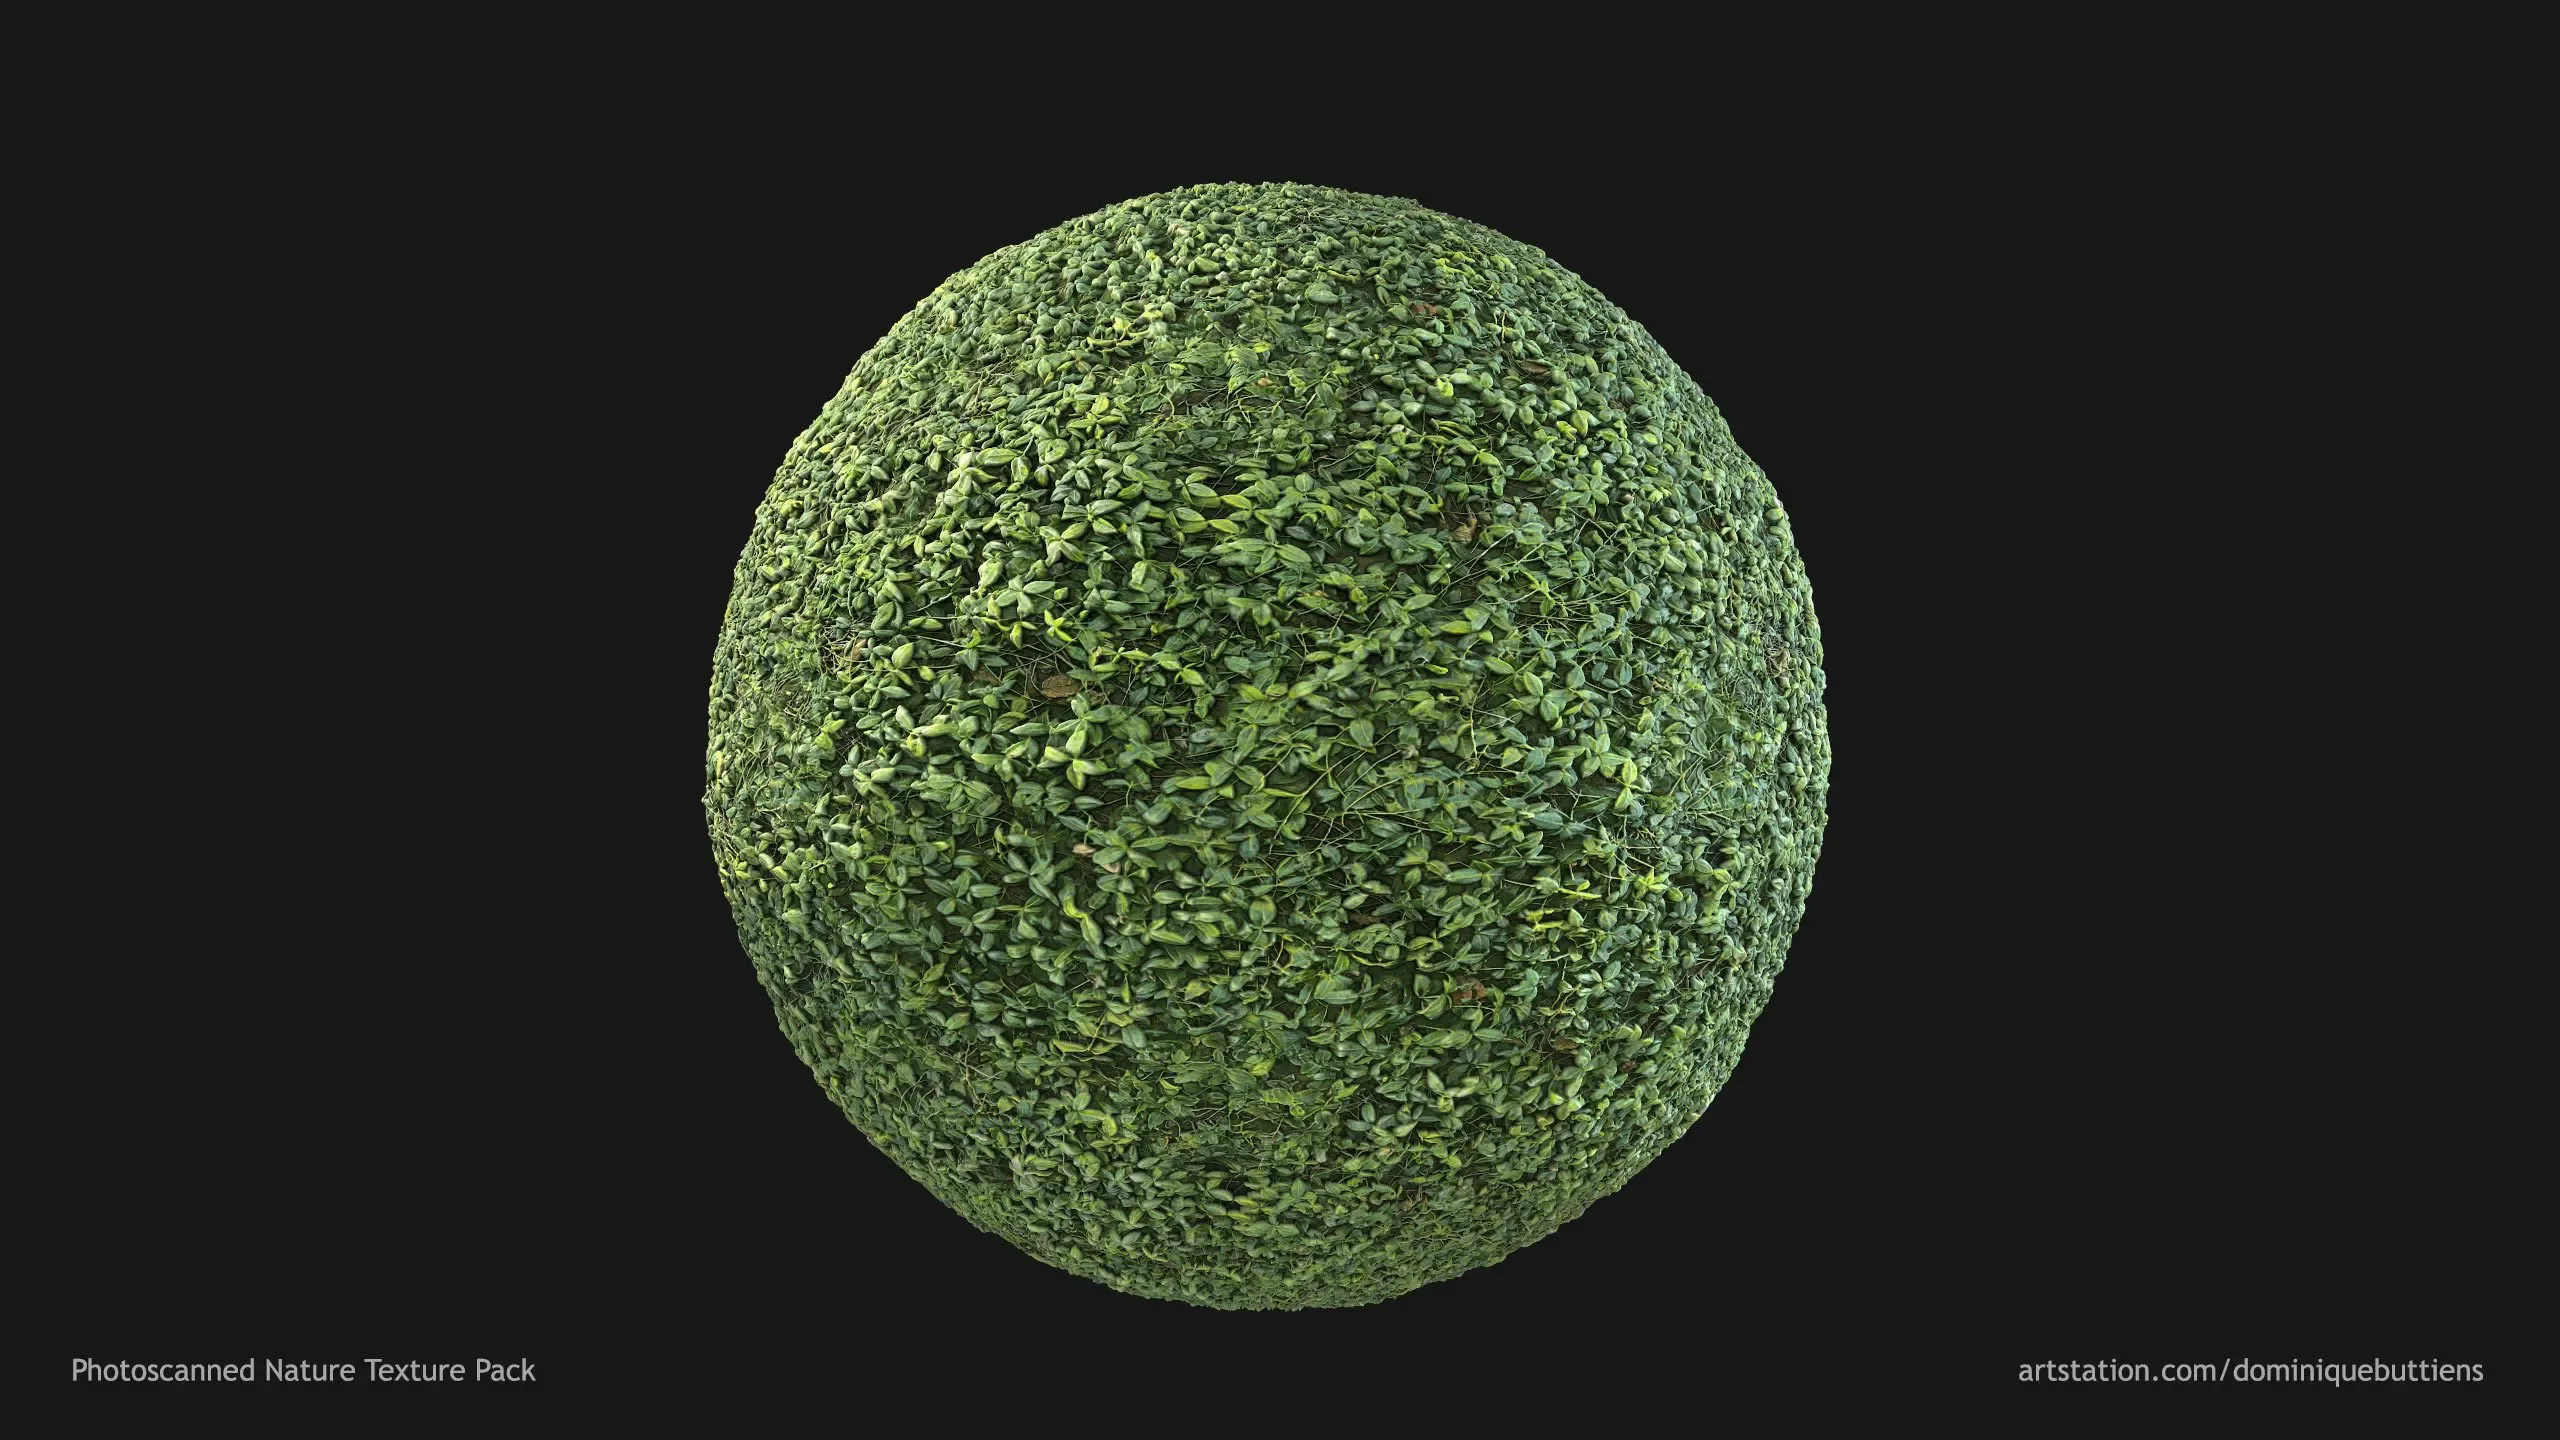 Photoscanned Nature Texture Pack